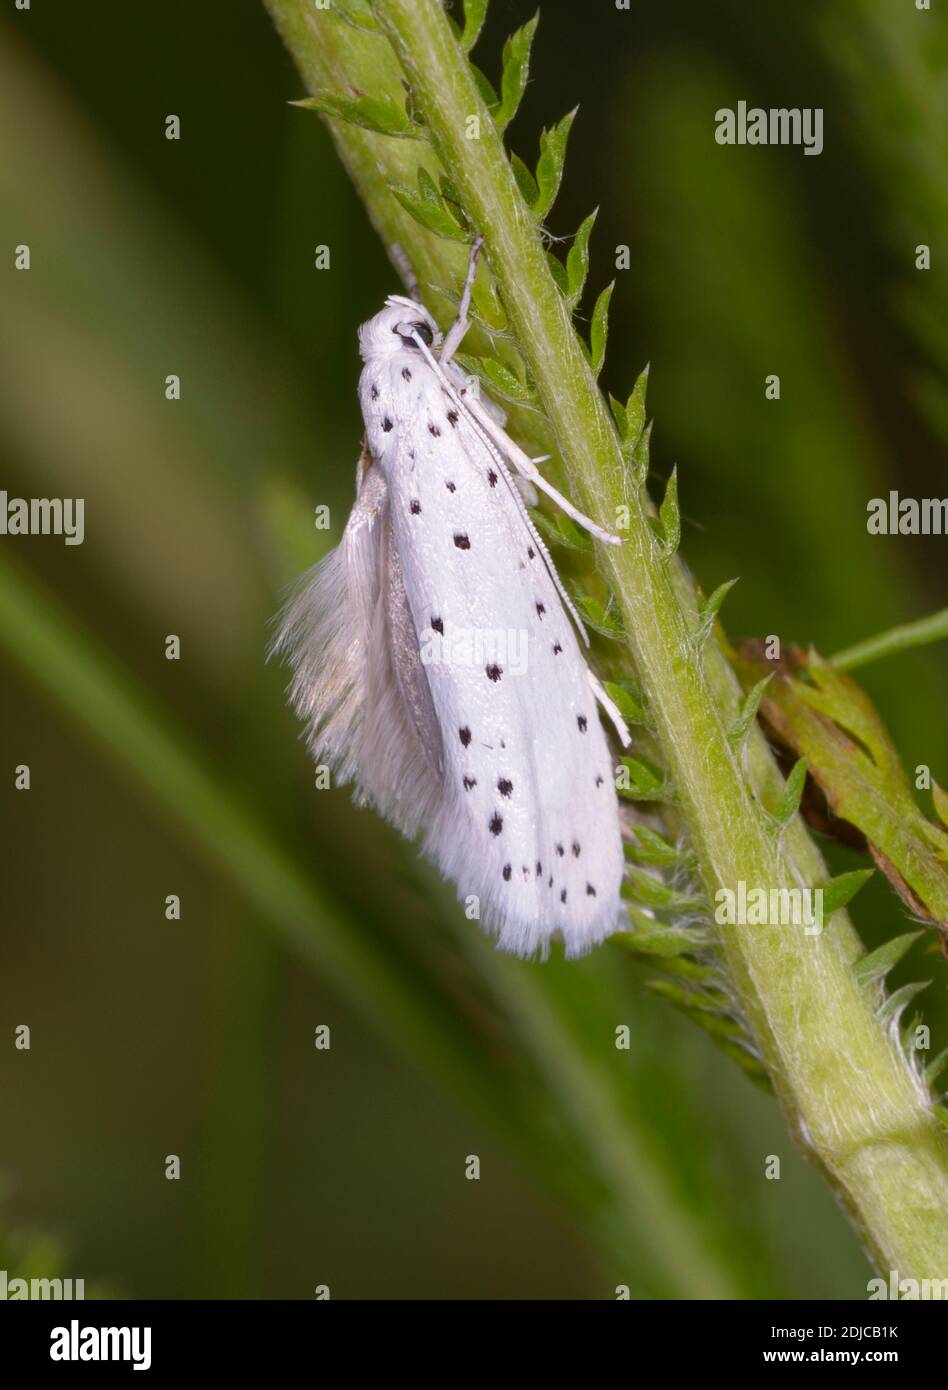 White black-spotted owlet moth sitting on a plant stem Stock Photo